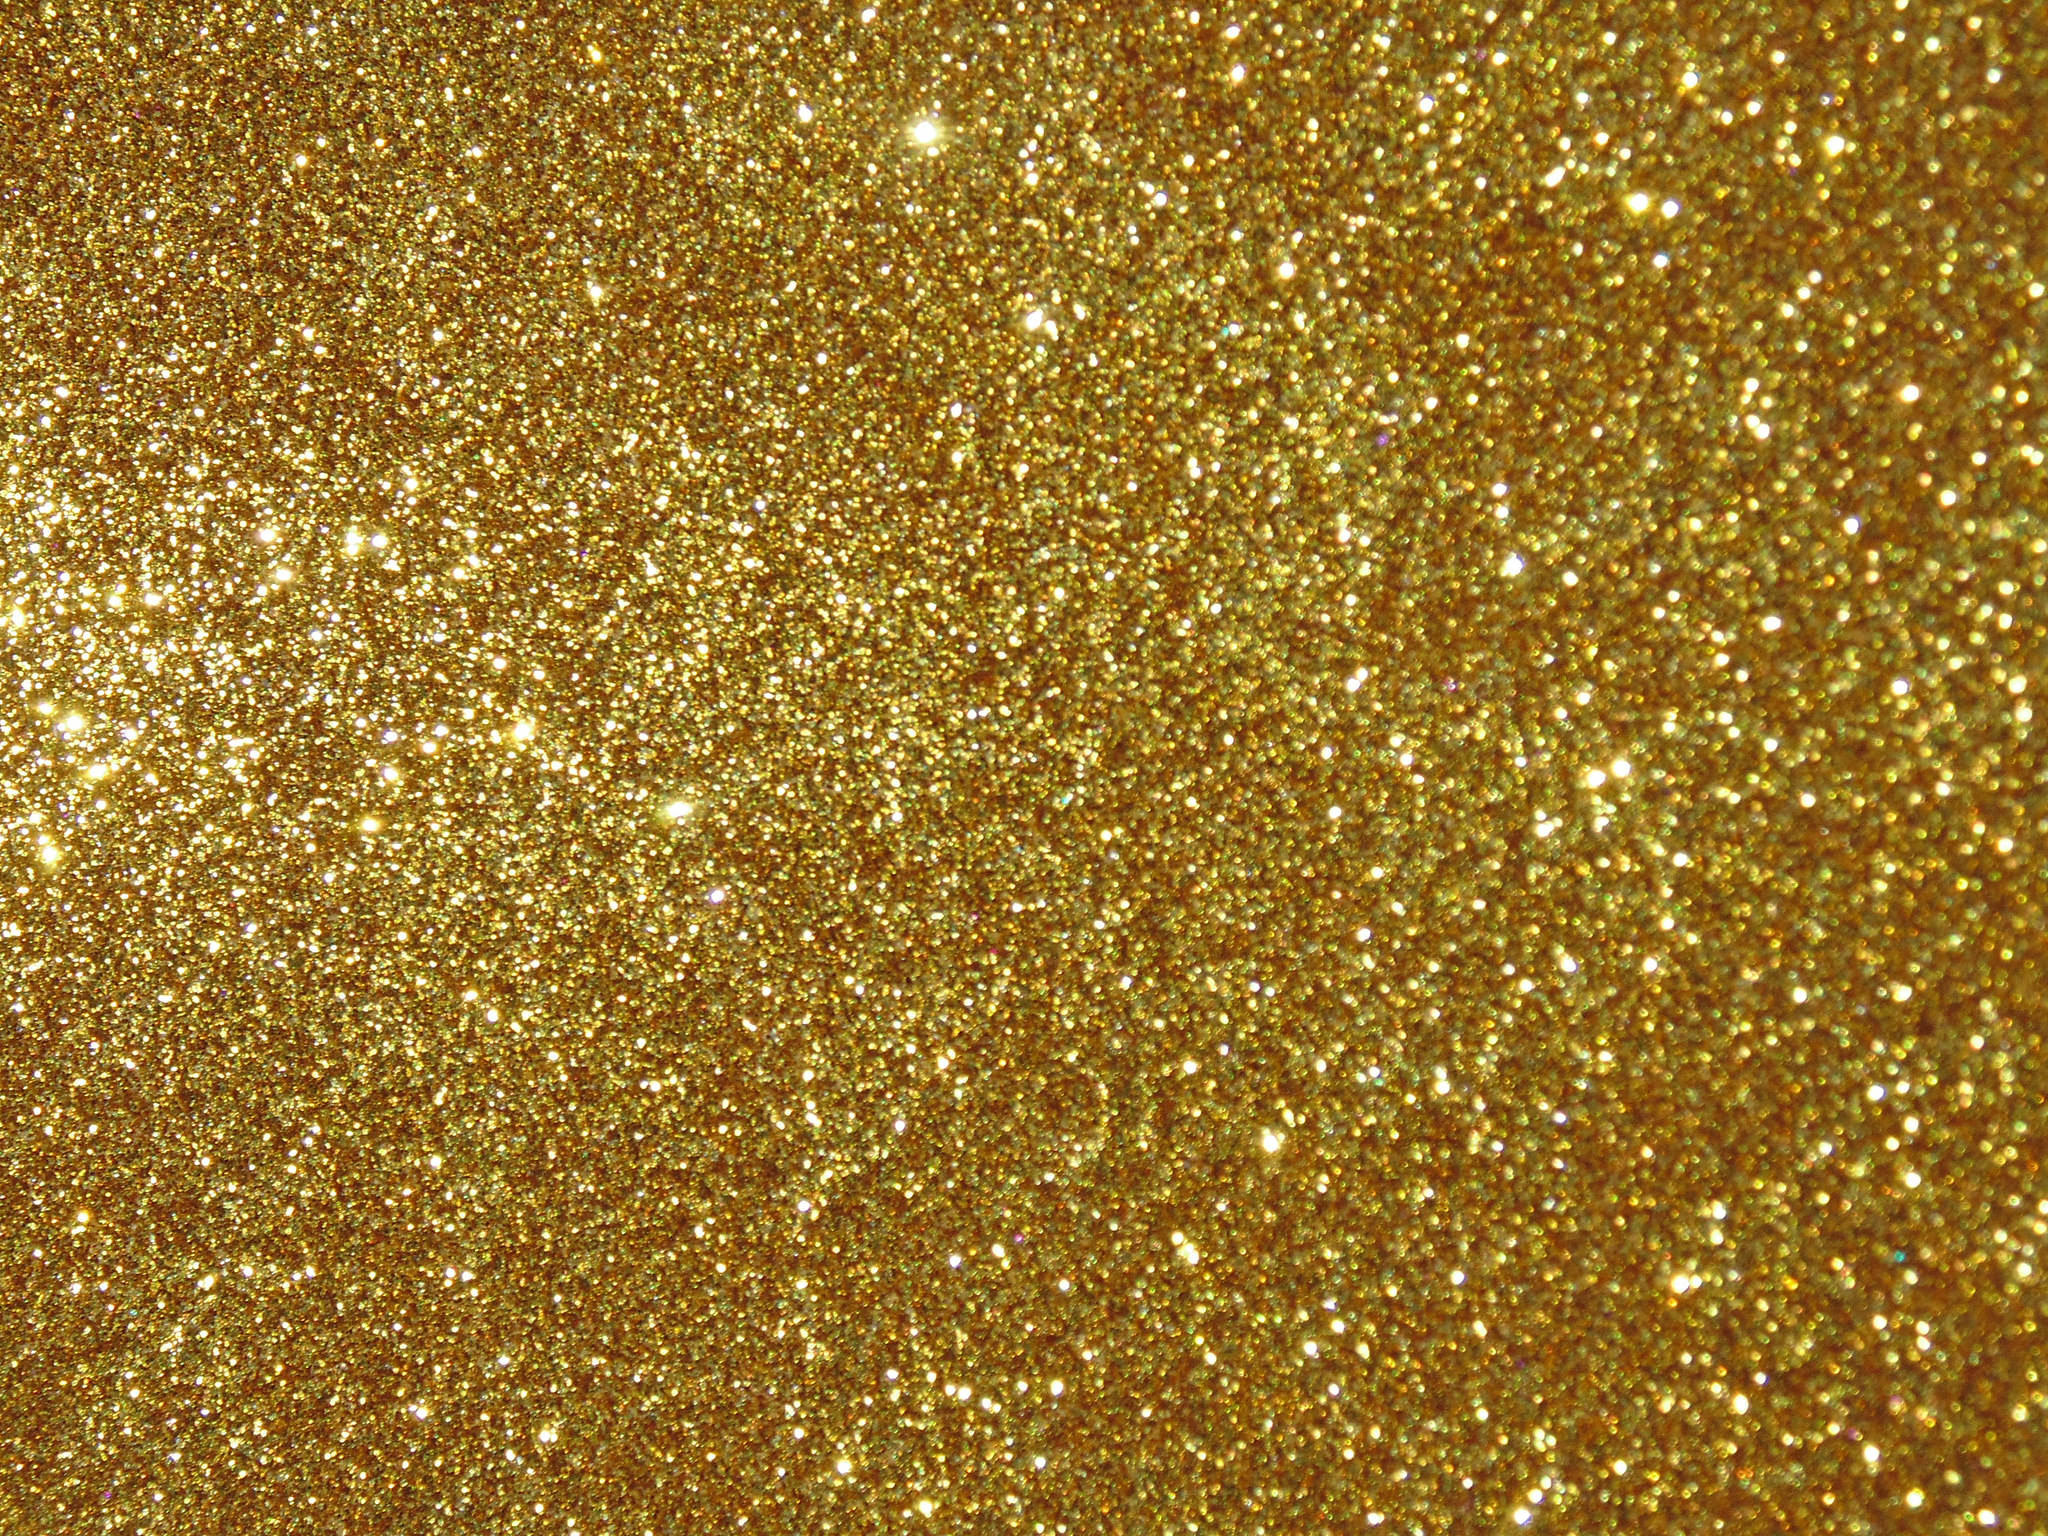 2048x1536 Gold Glitter Wallpaper HD | HD Wallpapers, Backgrounds, Images .